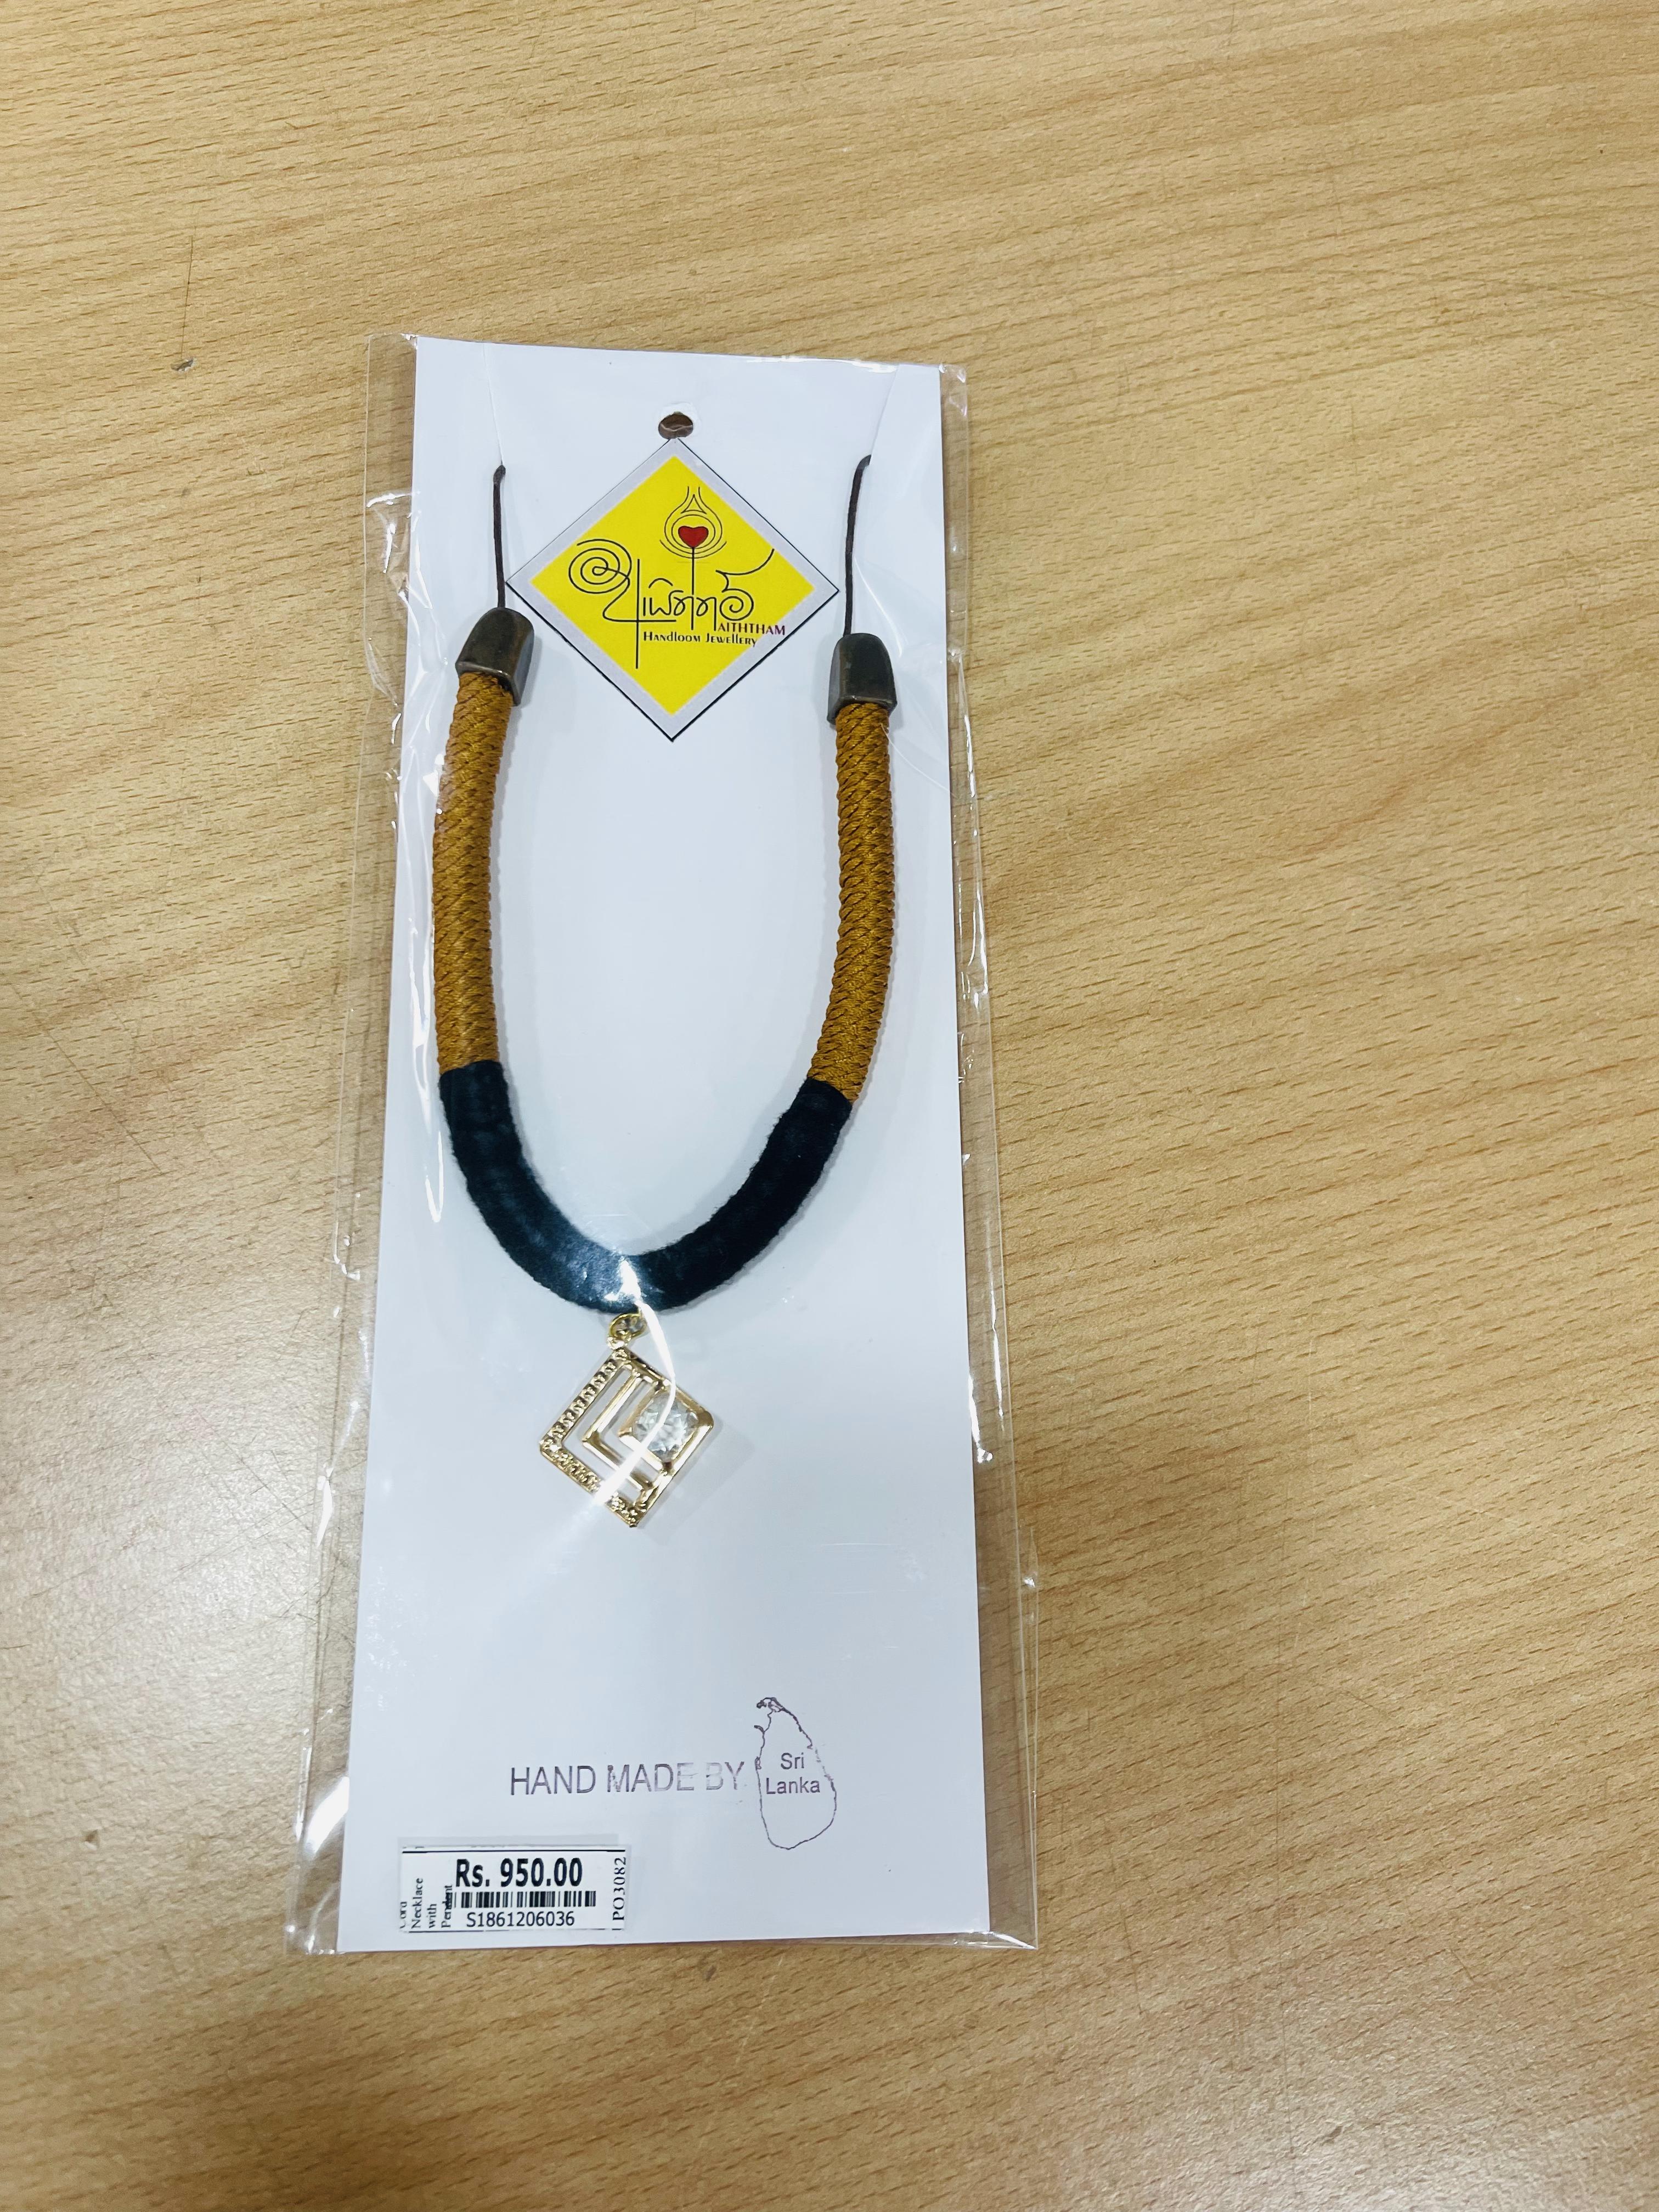 Aiththam Handloom Necklace for Ladies Gold & Black